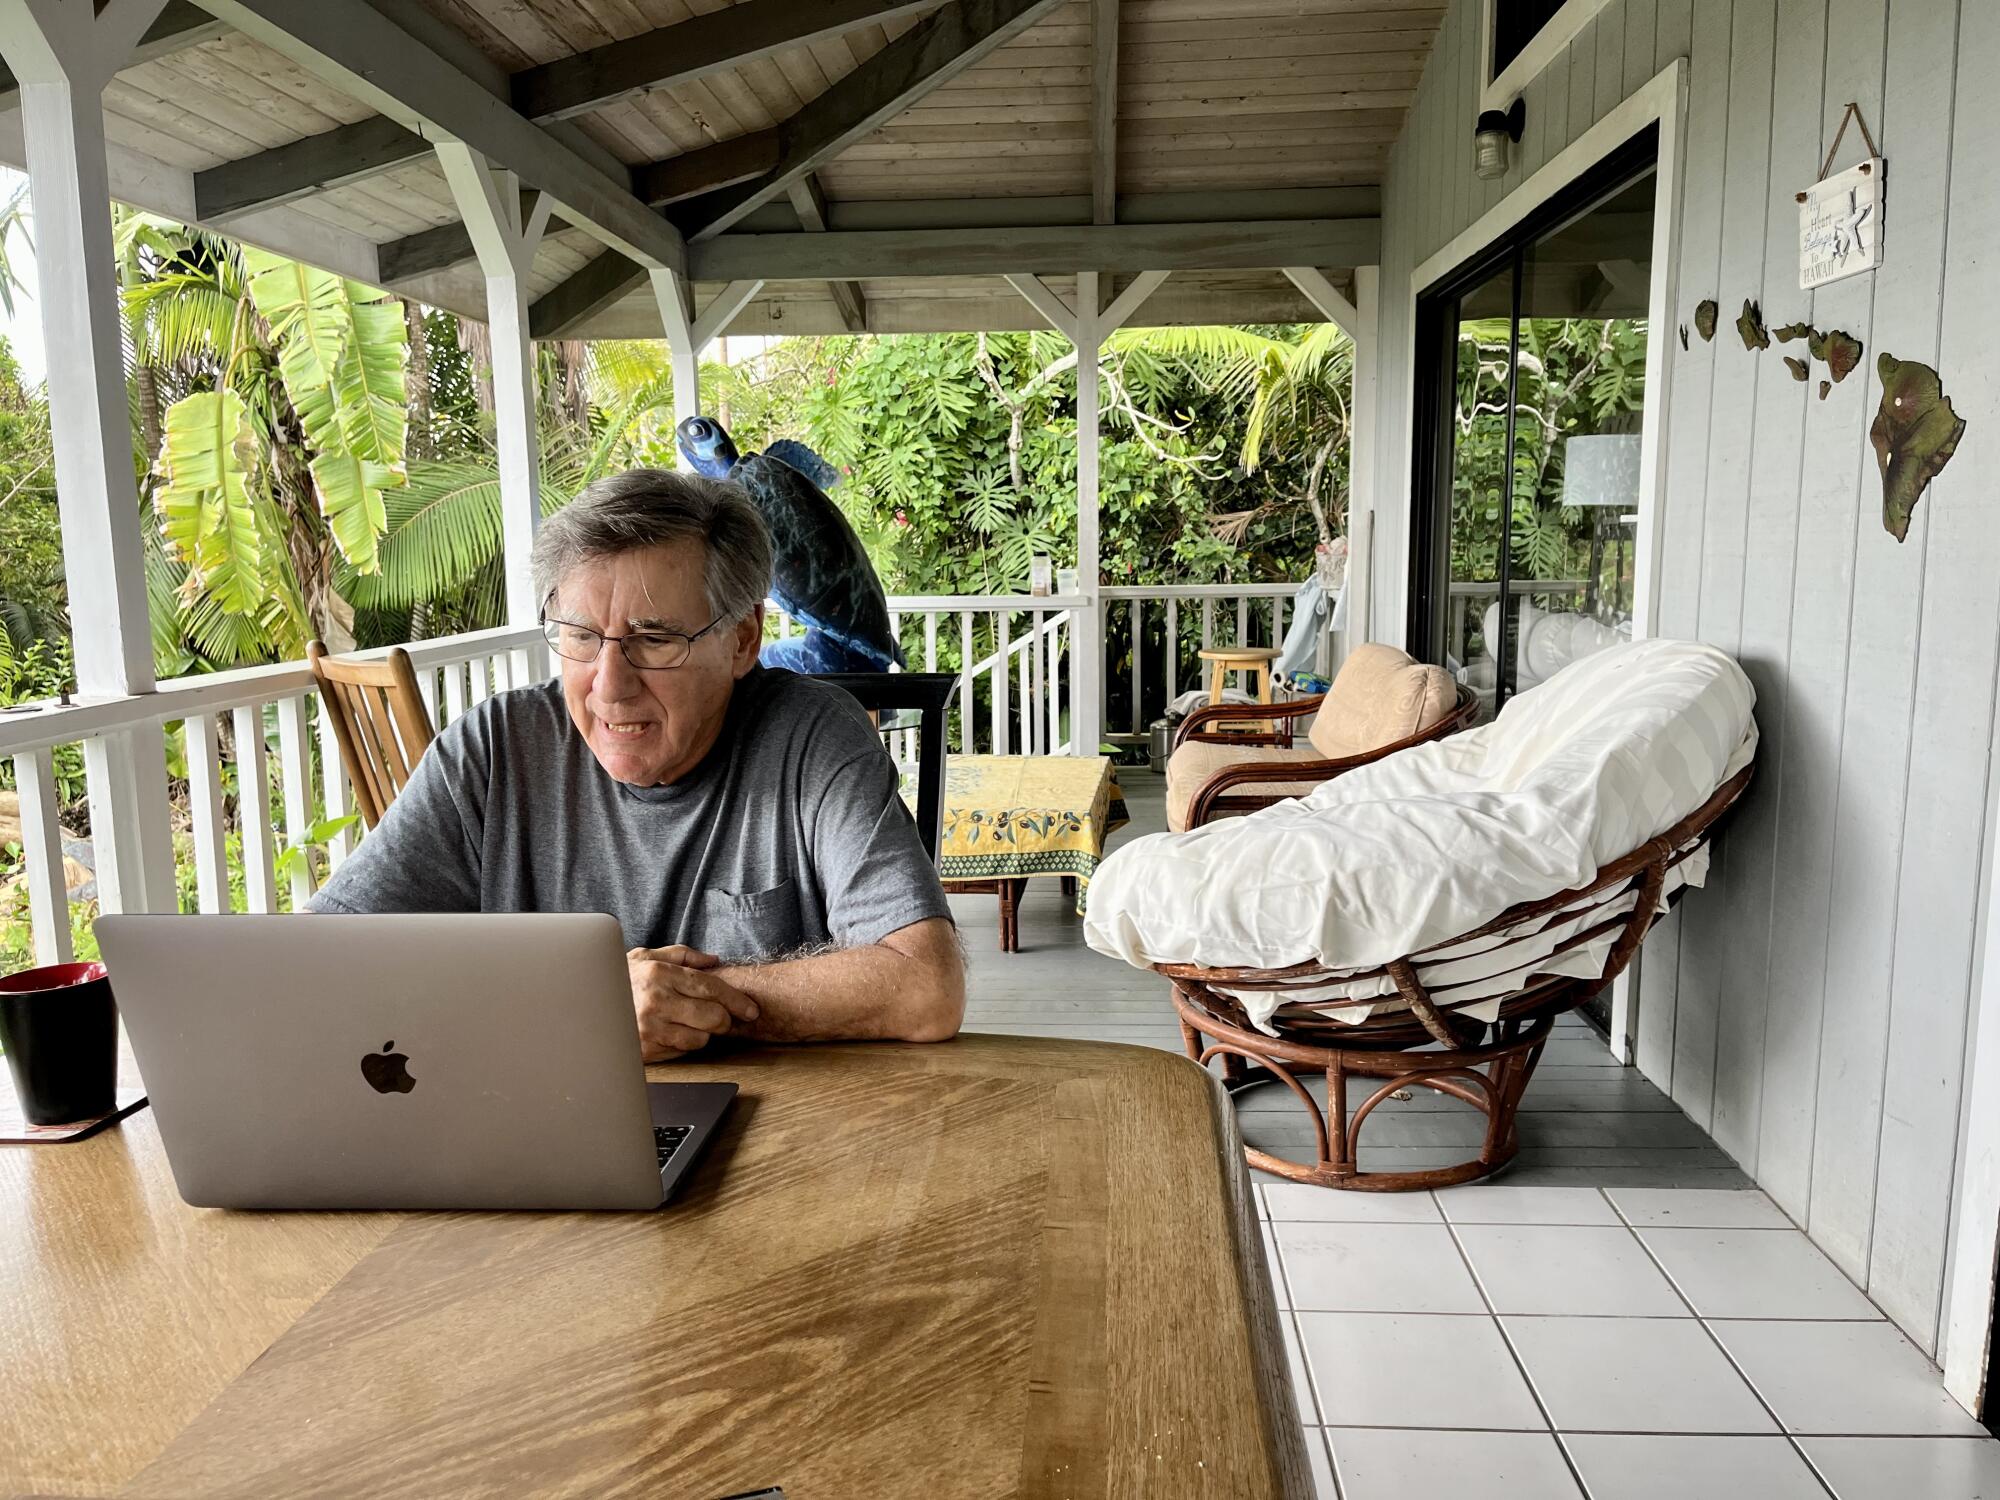 Jon Lomberg talks via Zoom to students at Avenues school from the patio of his home in Honaunau, Hawaii.